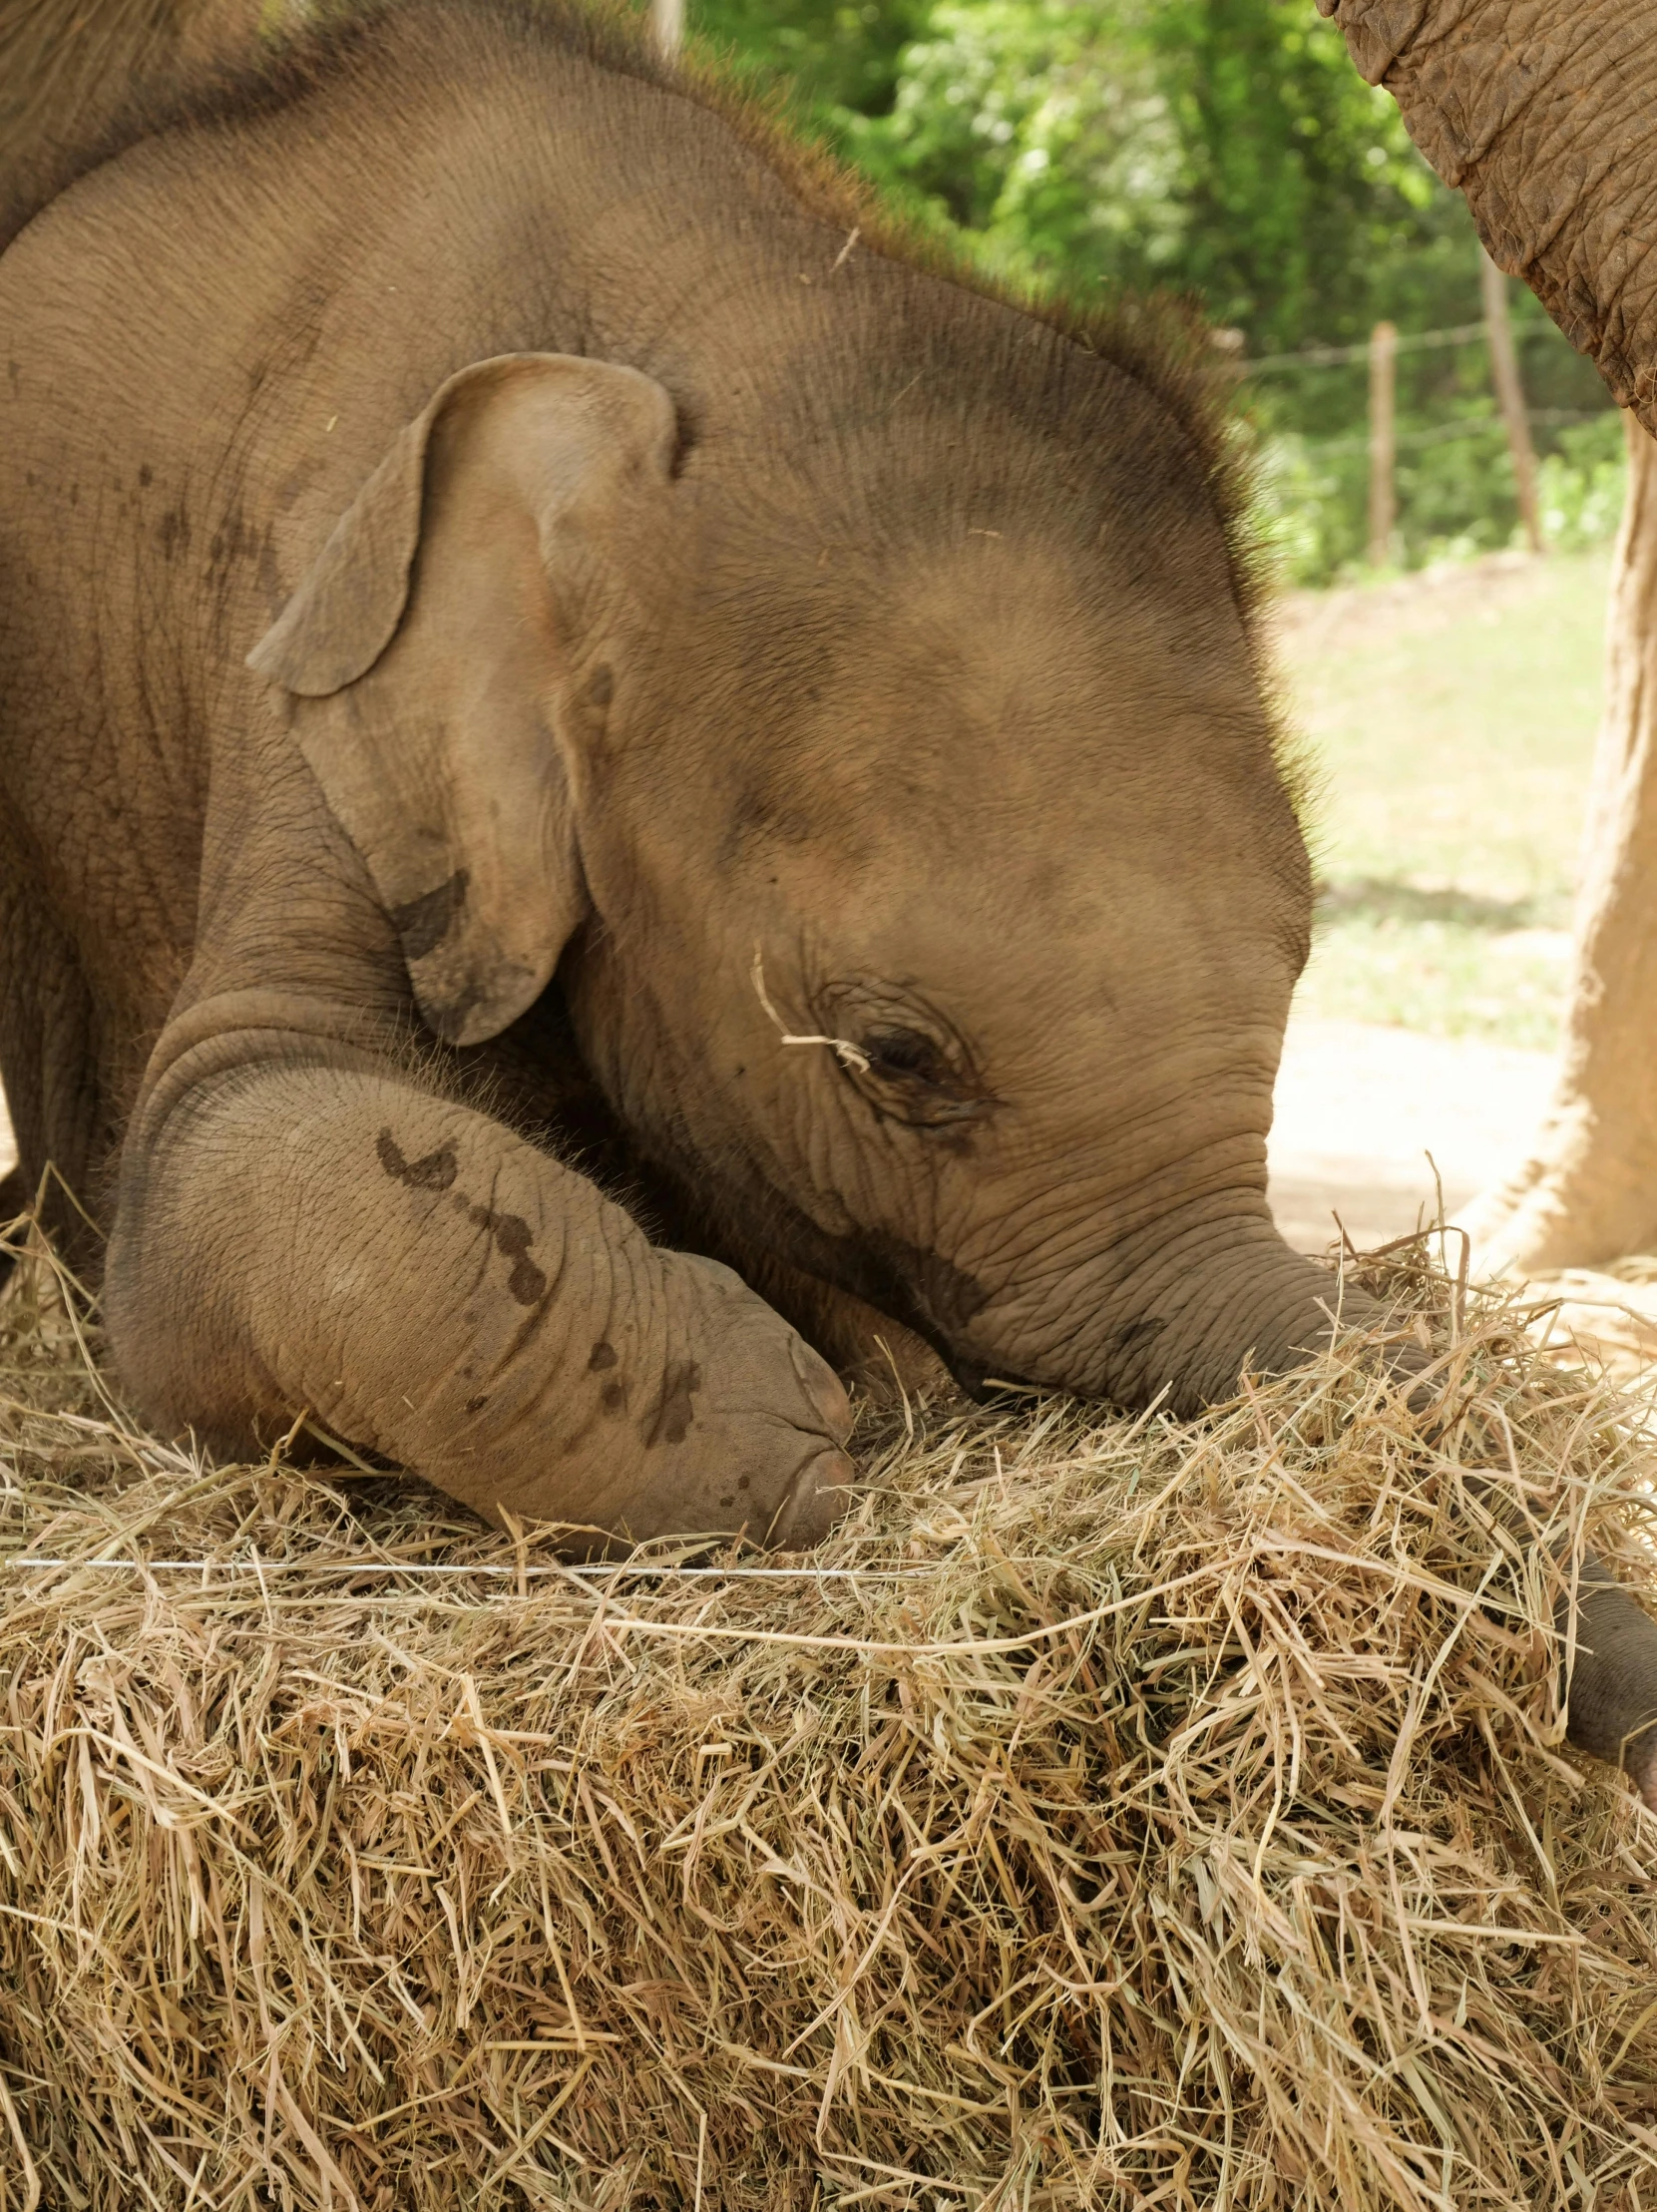 a baby elephant sitting down on a pile of hay